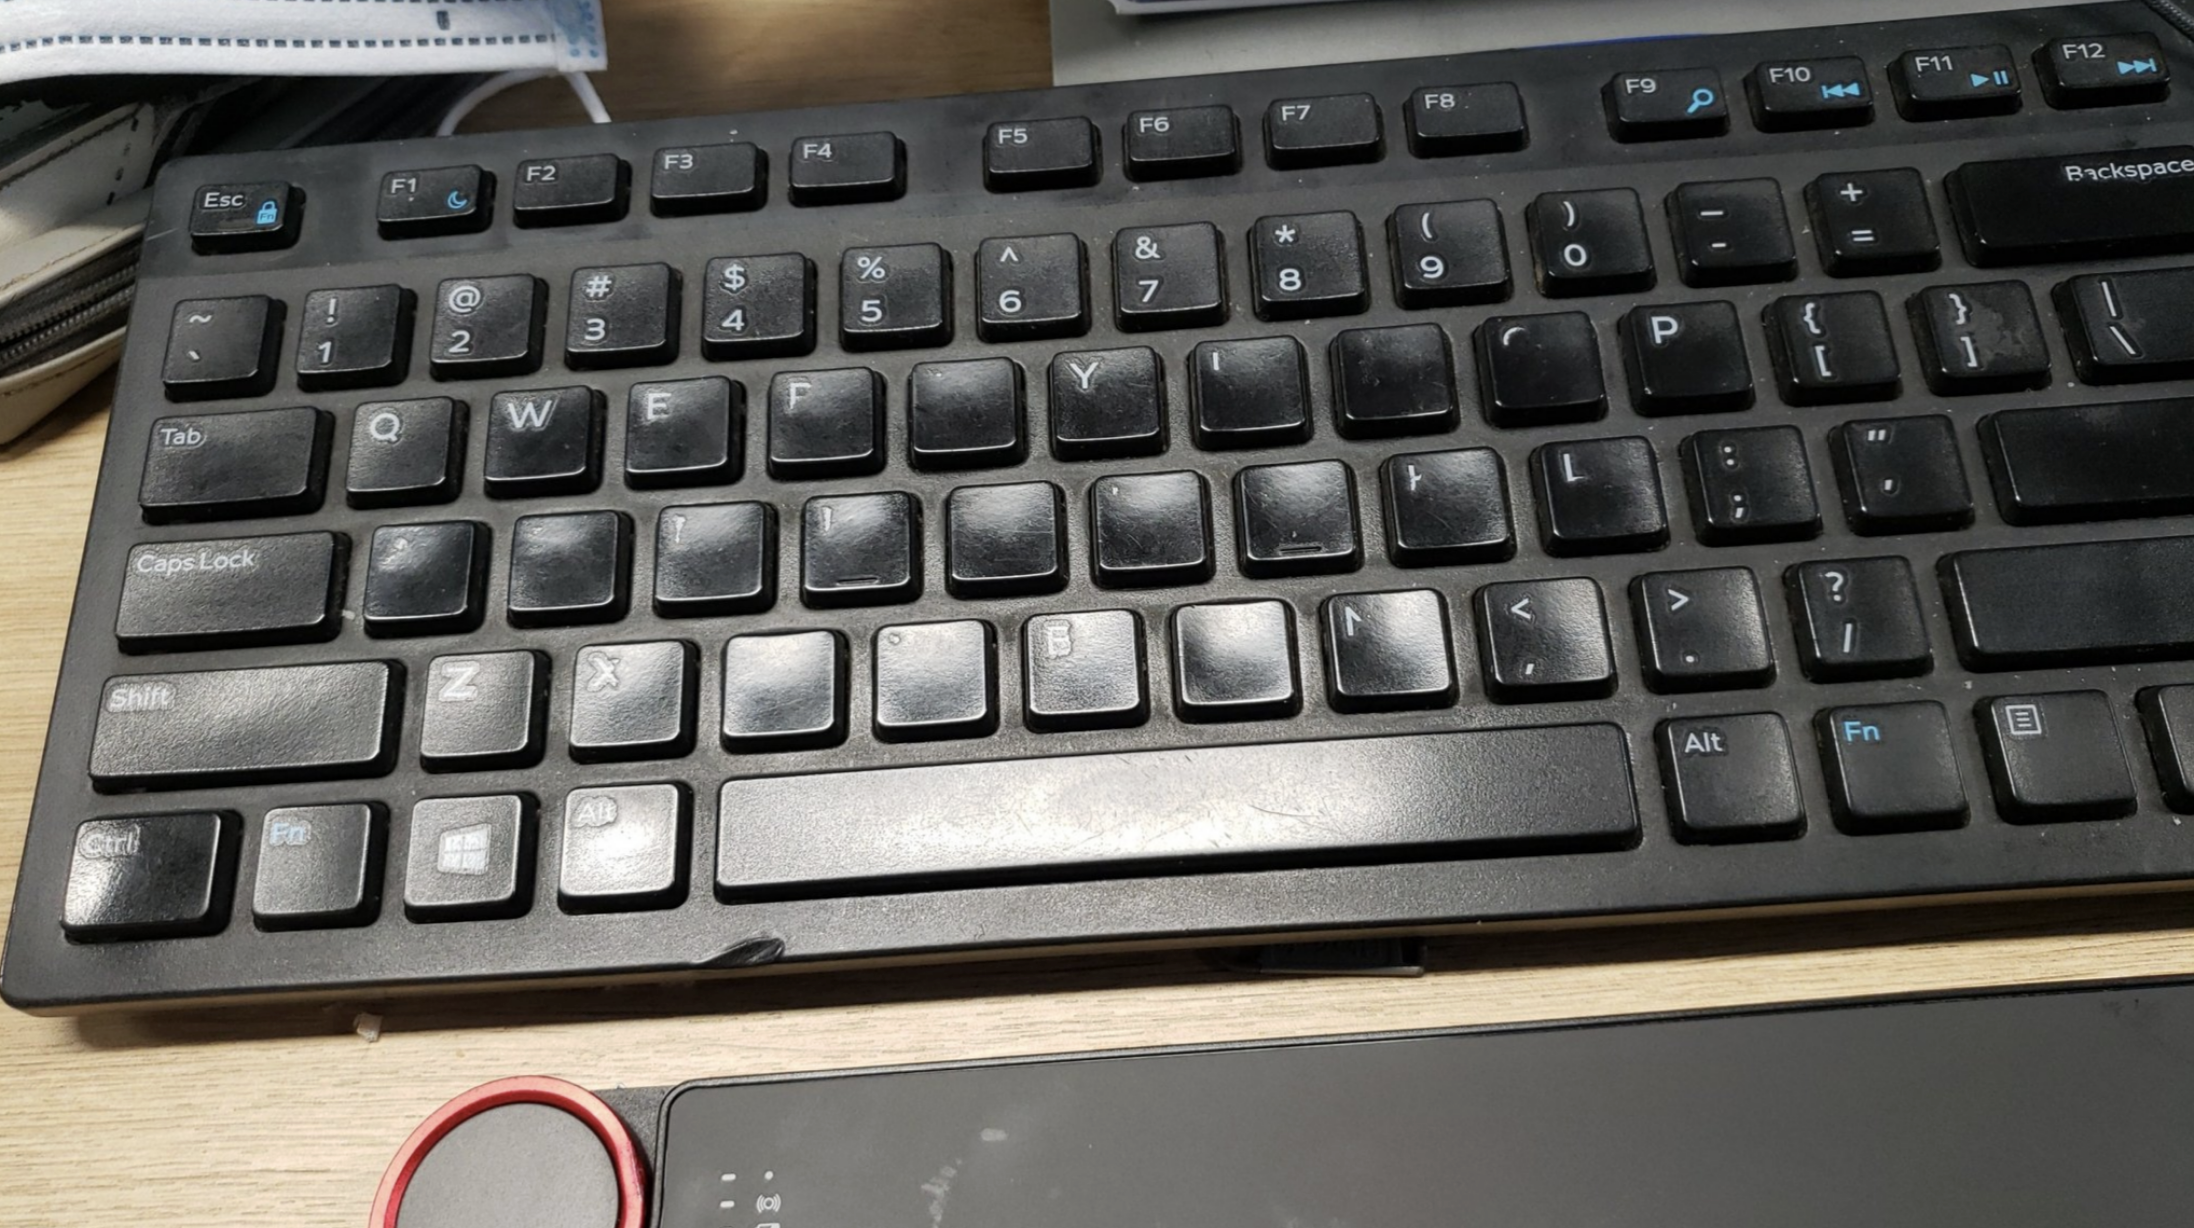 A used and faded keyboard